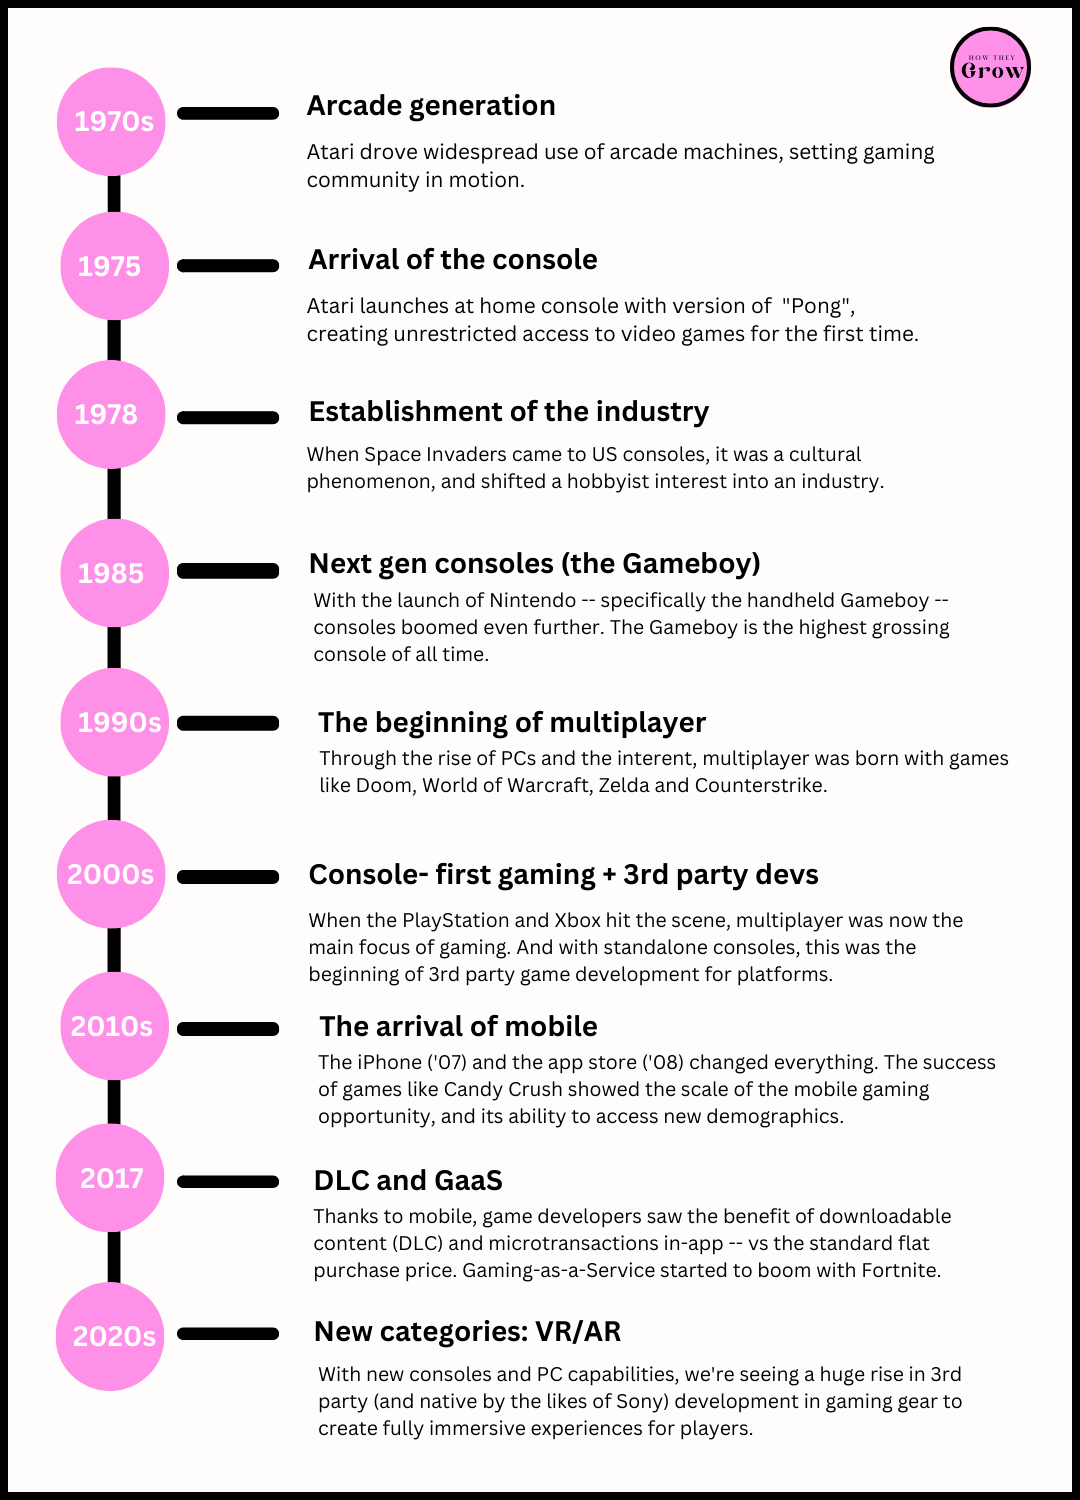 Epic Games: The Complete History and Strategy